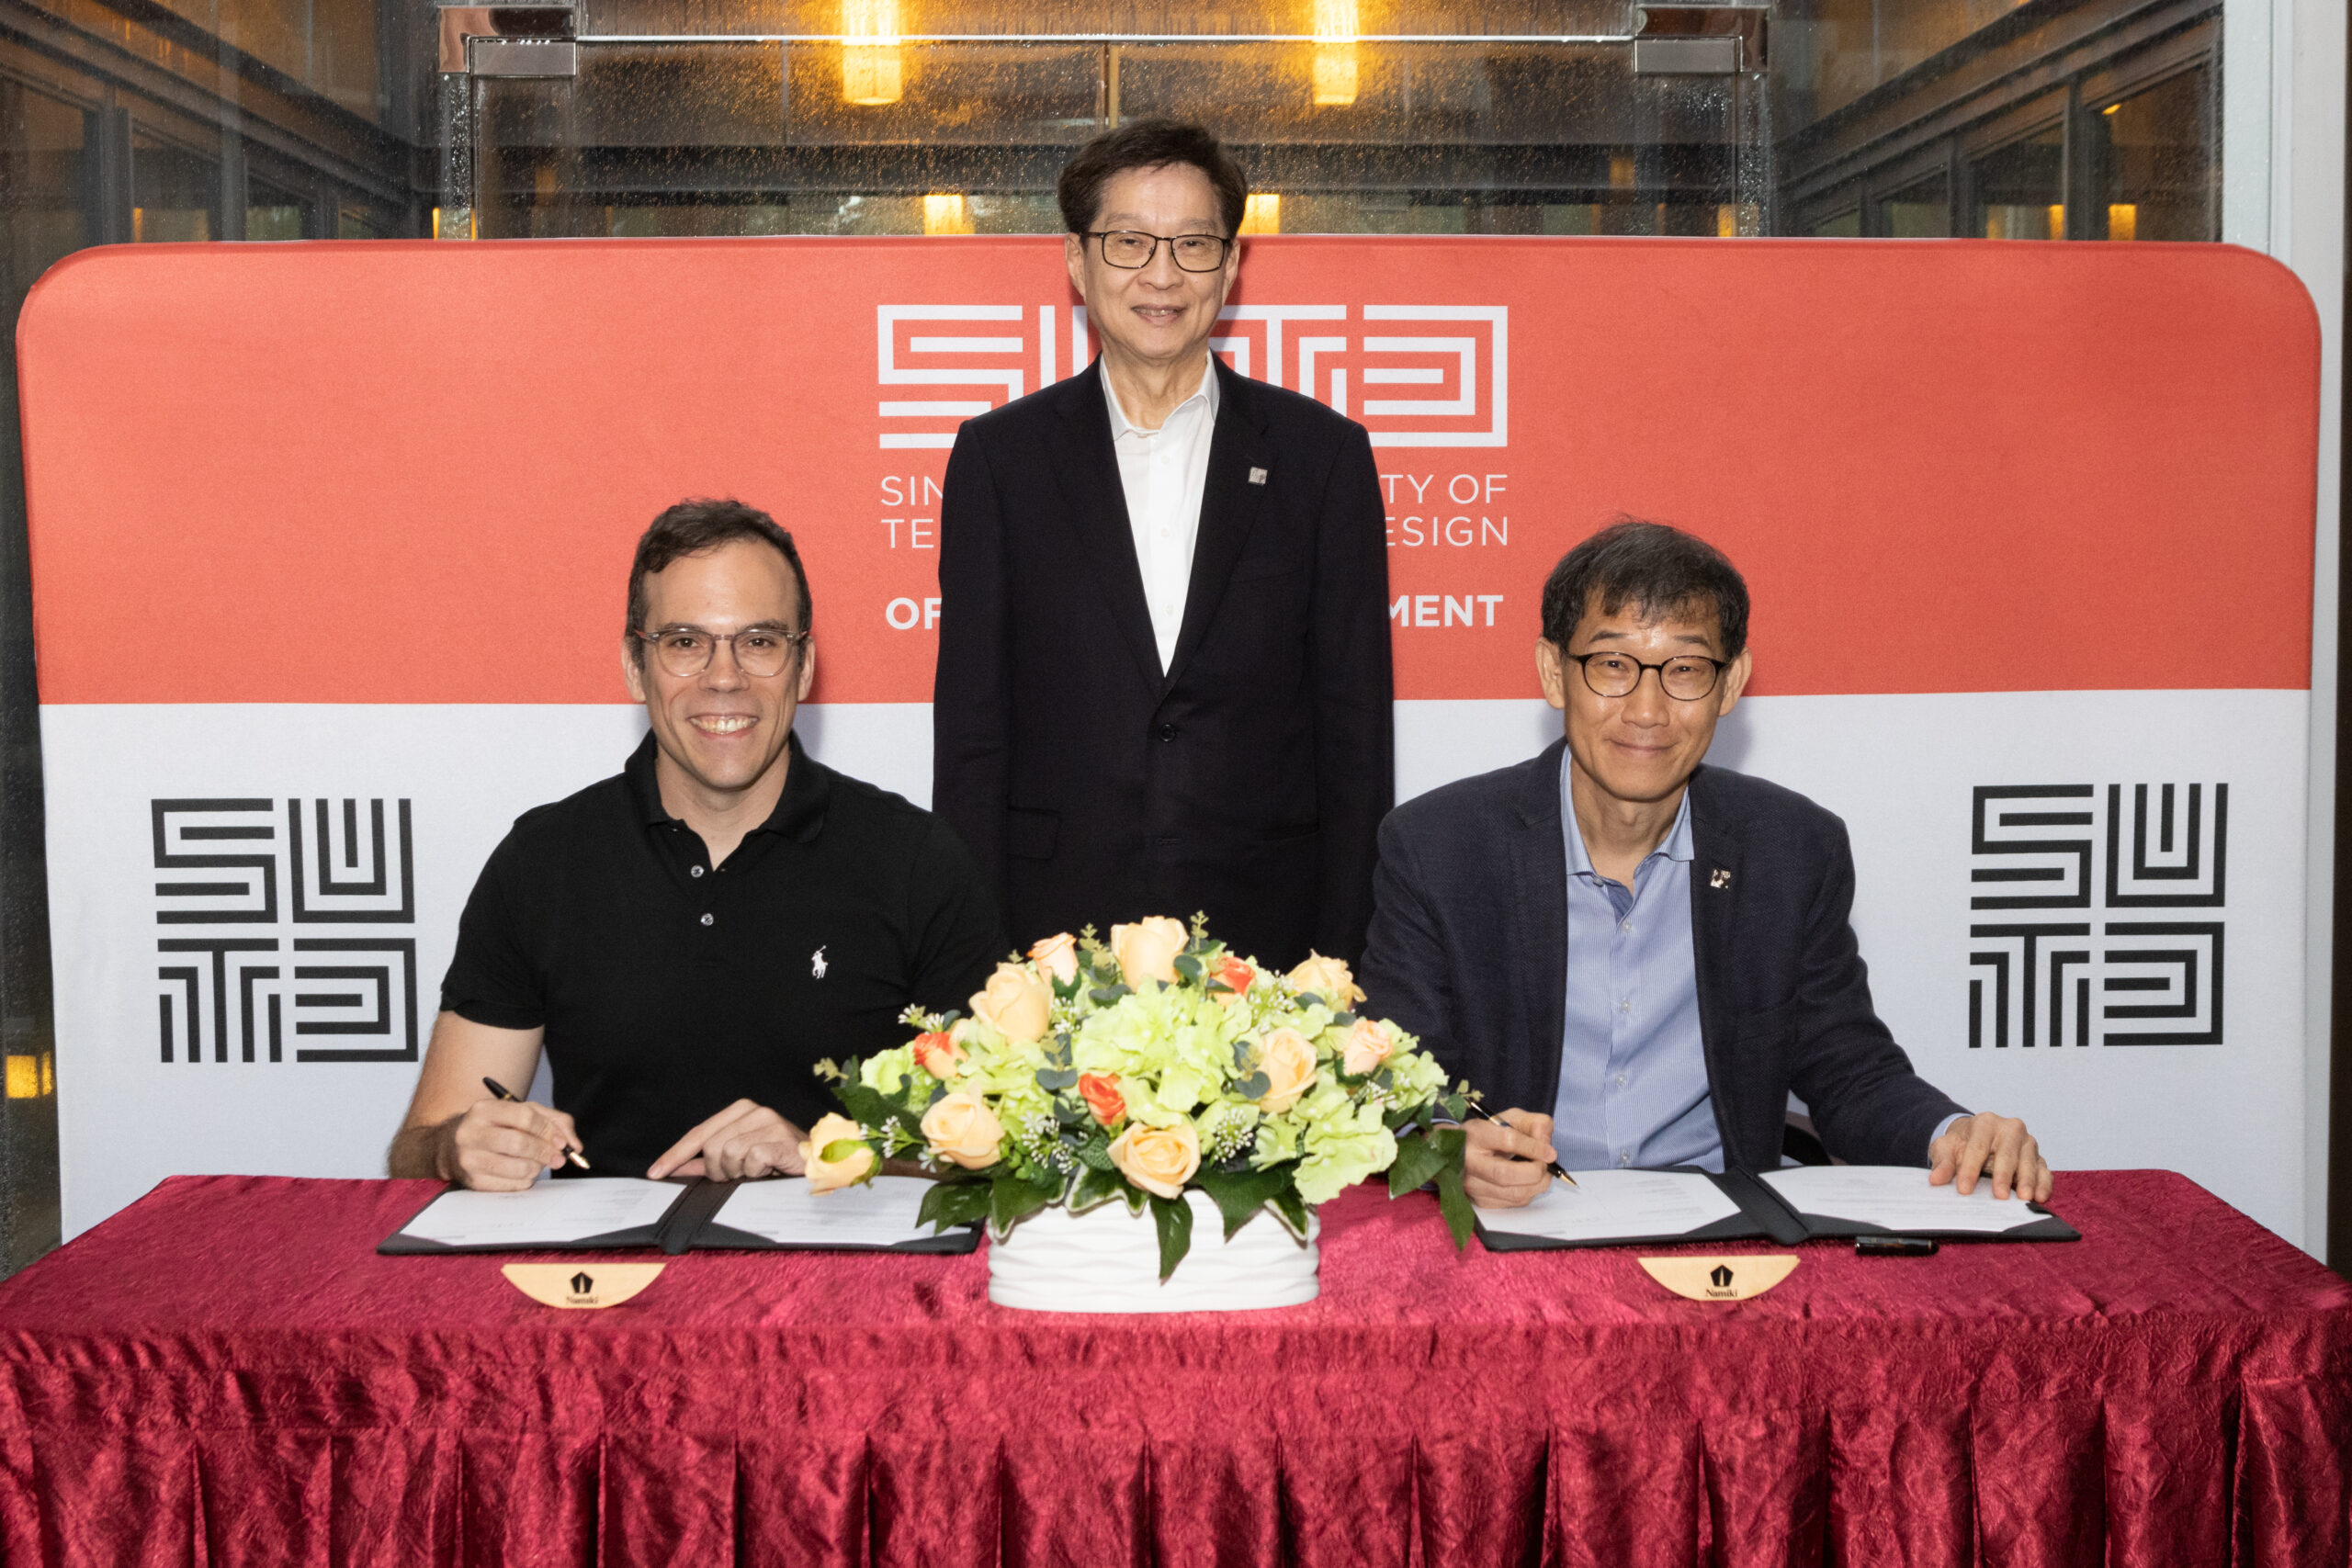 foodpanda inks gift agreement with SUTD to nurture Singapore’s tech talent of the future